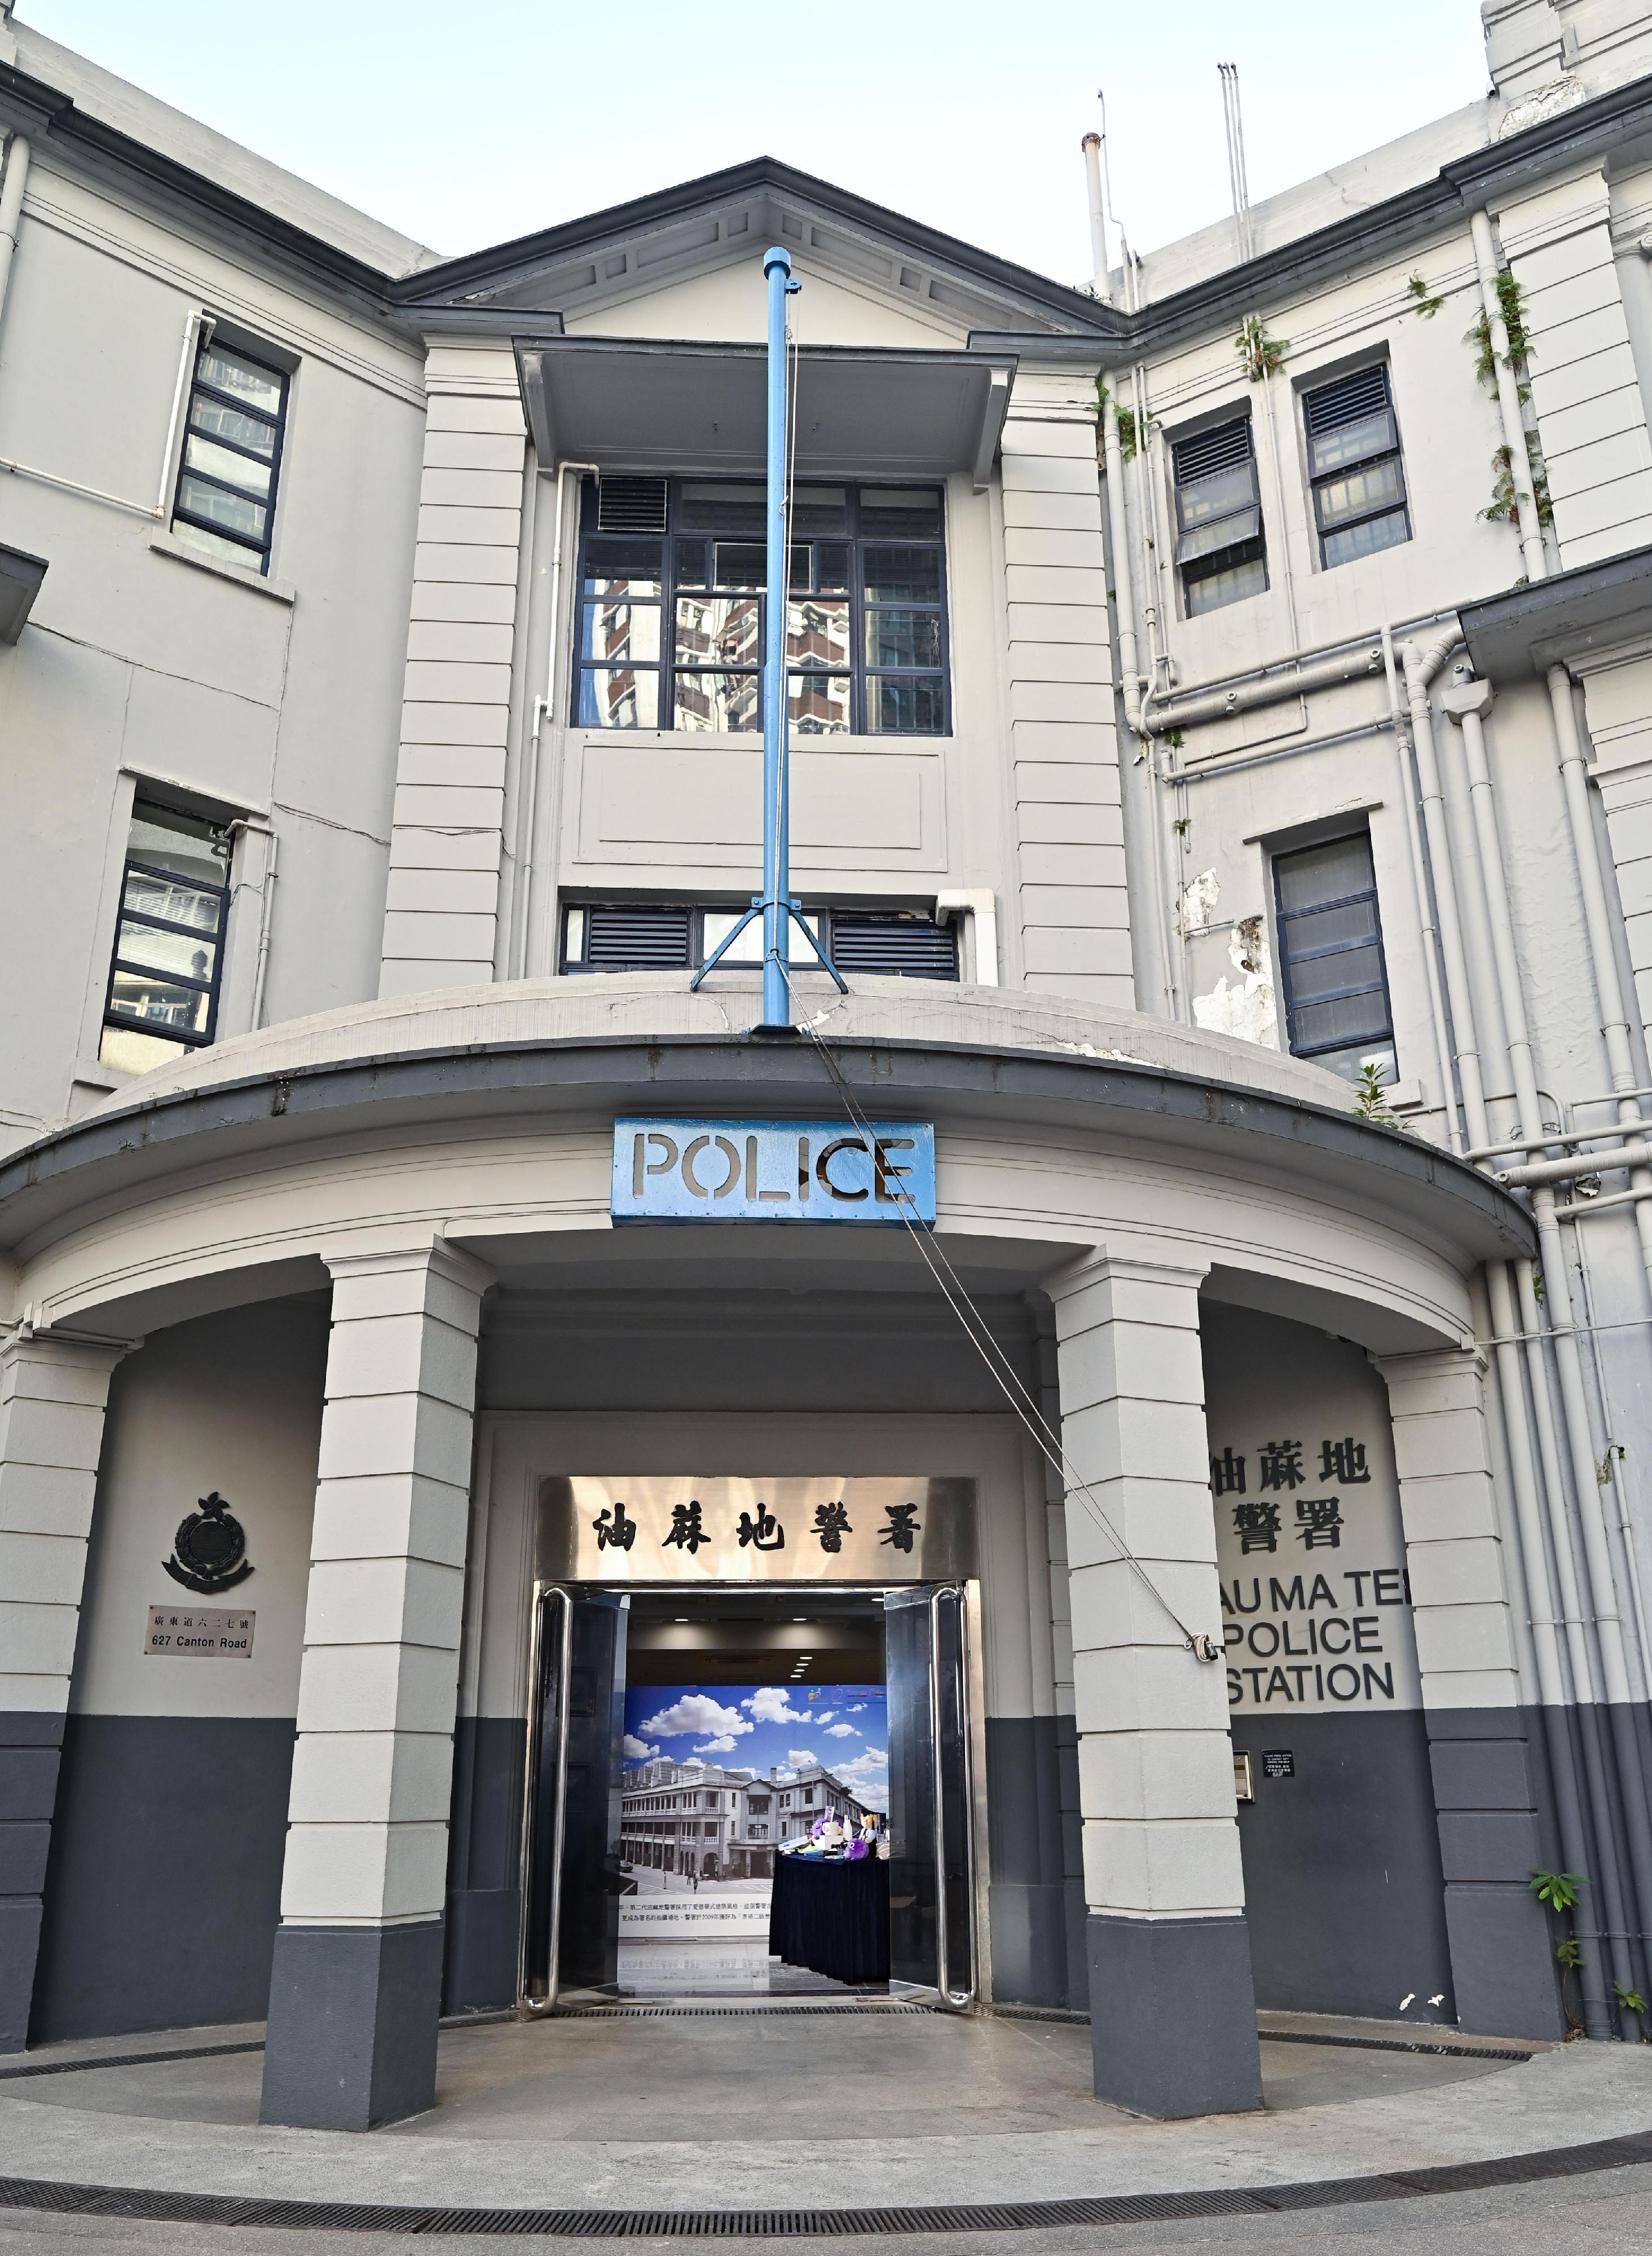 The Police Souvenir Gallery Pop-up Store will be set up at the old Yau Ma Tei Police Station every Saturday from tomorrow (December 9). Designated as a Grade 2 historic building, the old Yau Ma Tei Police Station has emerged as a cherished landmark which attracts members of the public, as well as tourists from far and wide to take photos there.